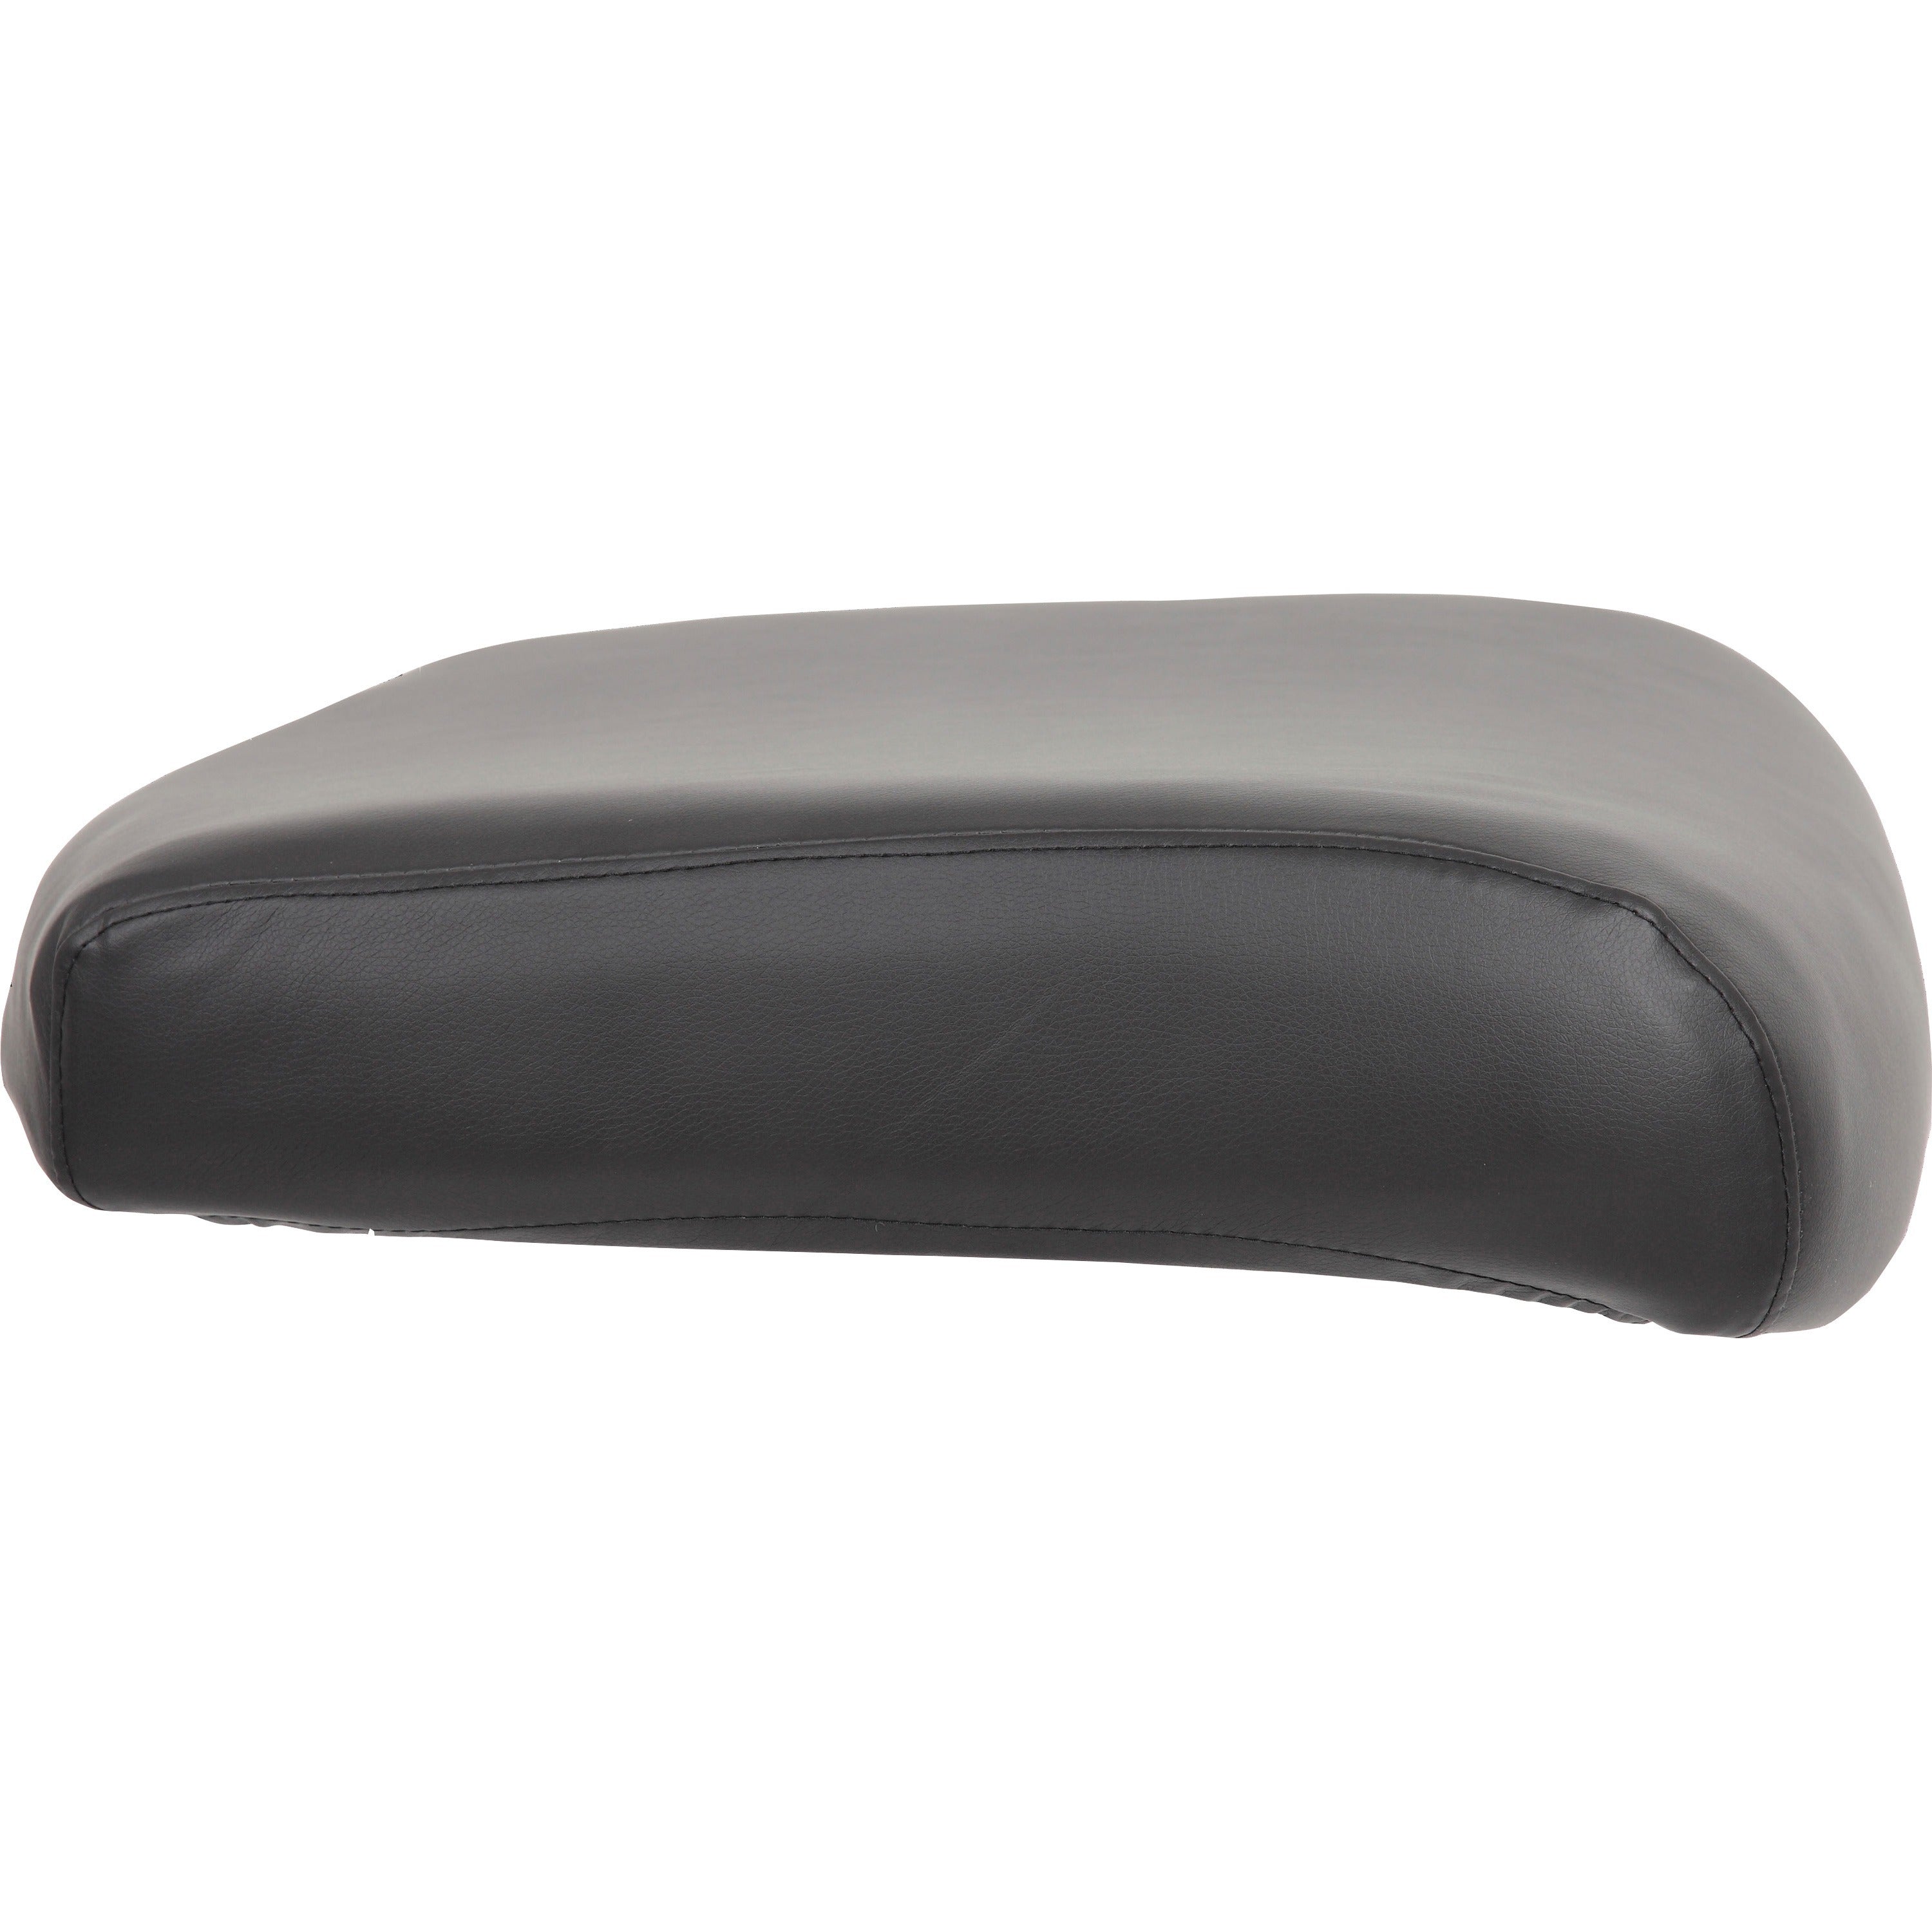 lorell-antimicrobial-seat-cover-19-length-x-19-width-polyester-black-1-each_llr00598 - 1